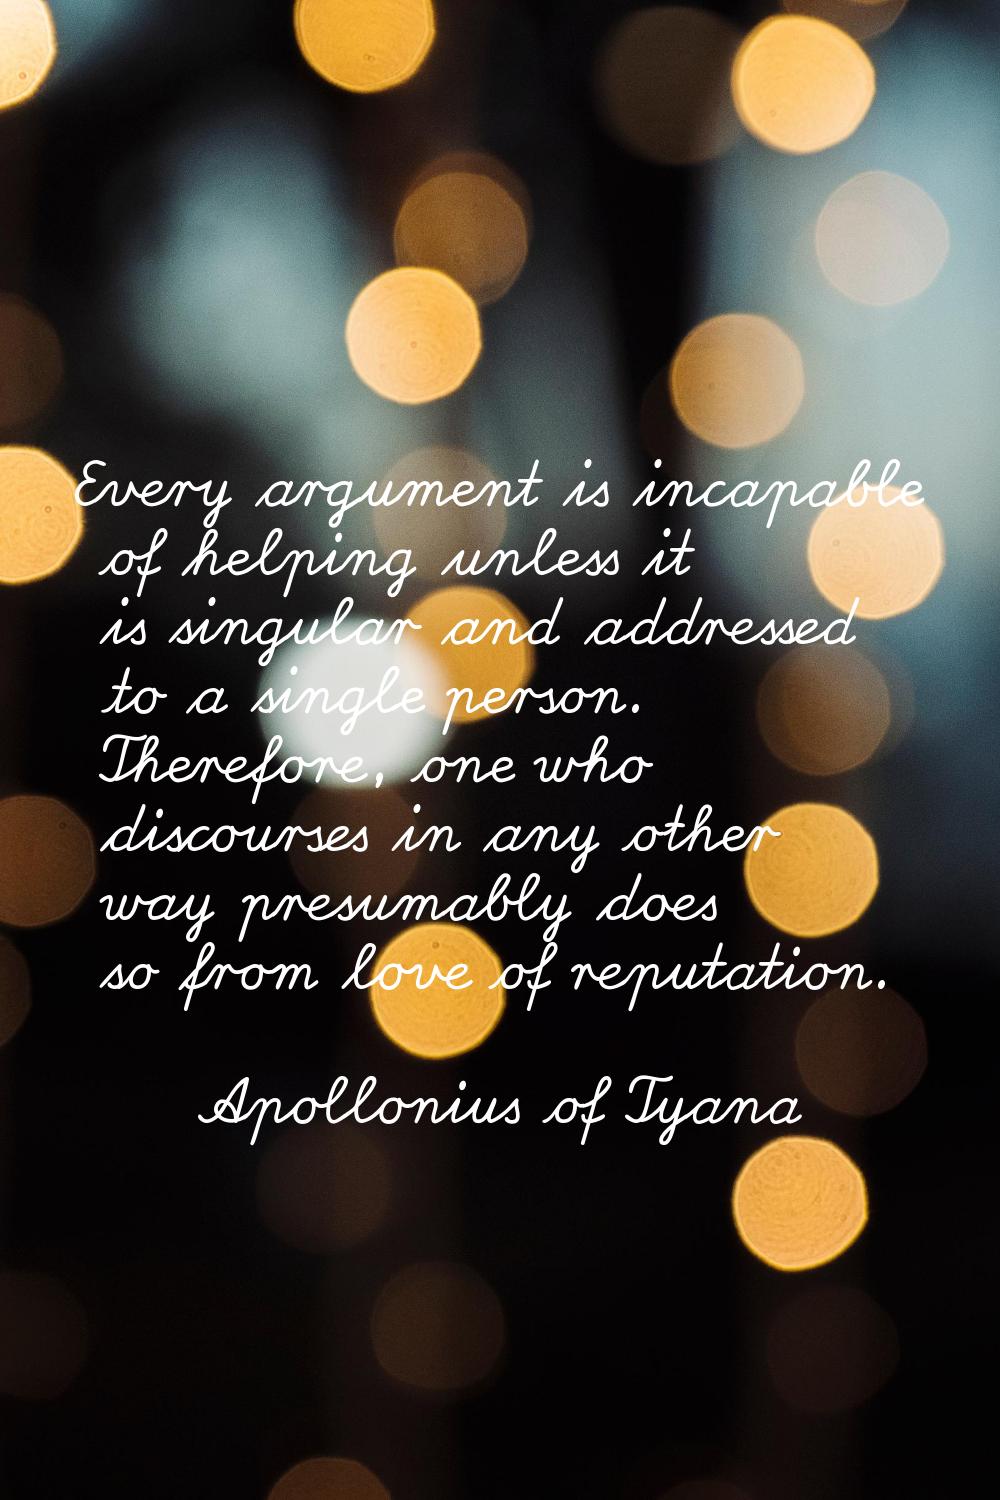 Every argument is incapable of helping unless it is singular and addressed to a single person. Ther